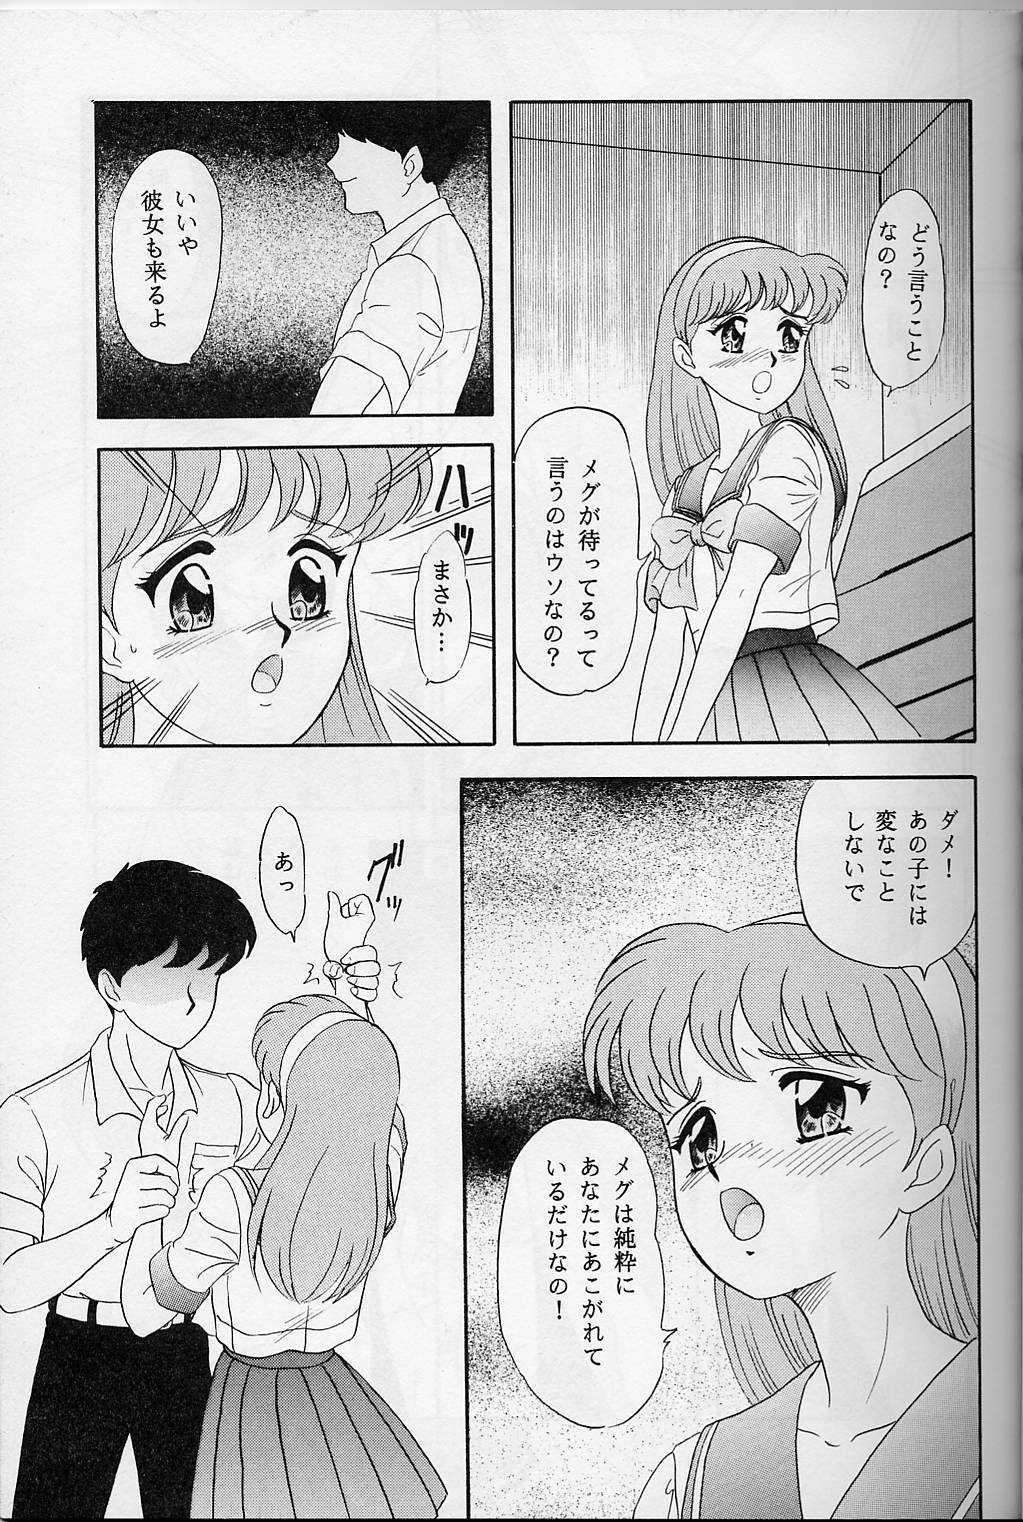 Shaved Lunch Time 5 - Tokimeki memorial Hardcore Sex - Page 6